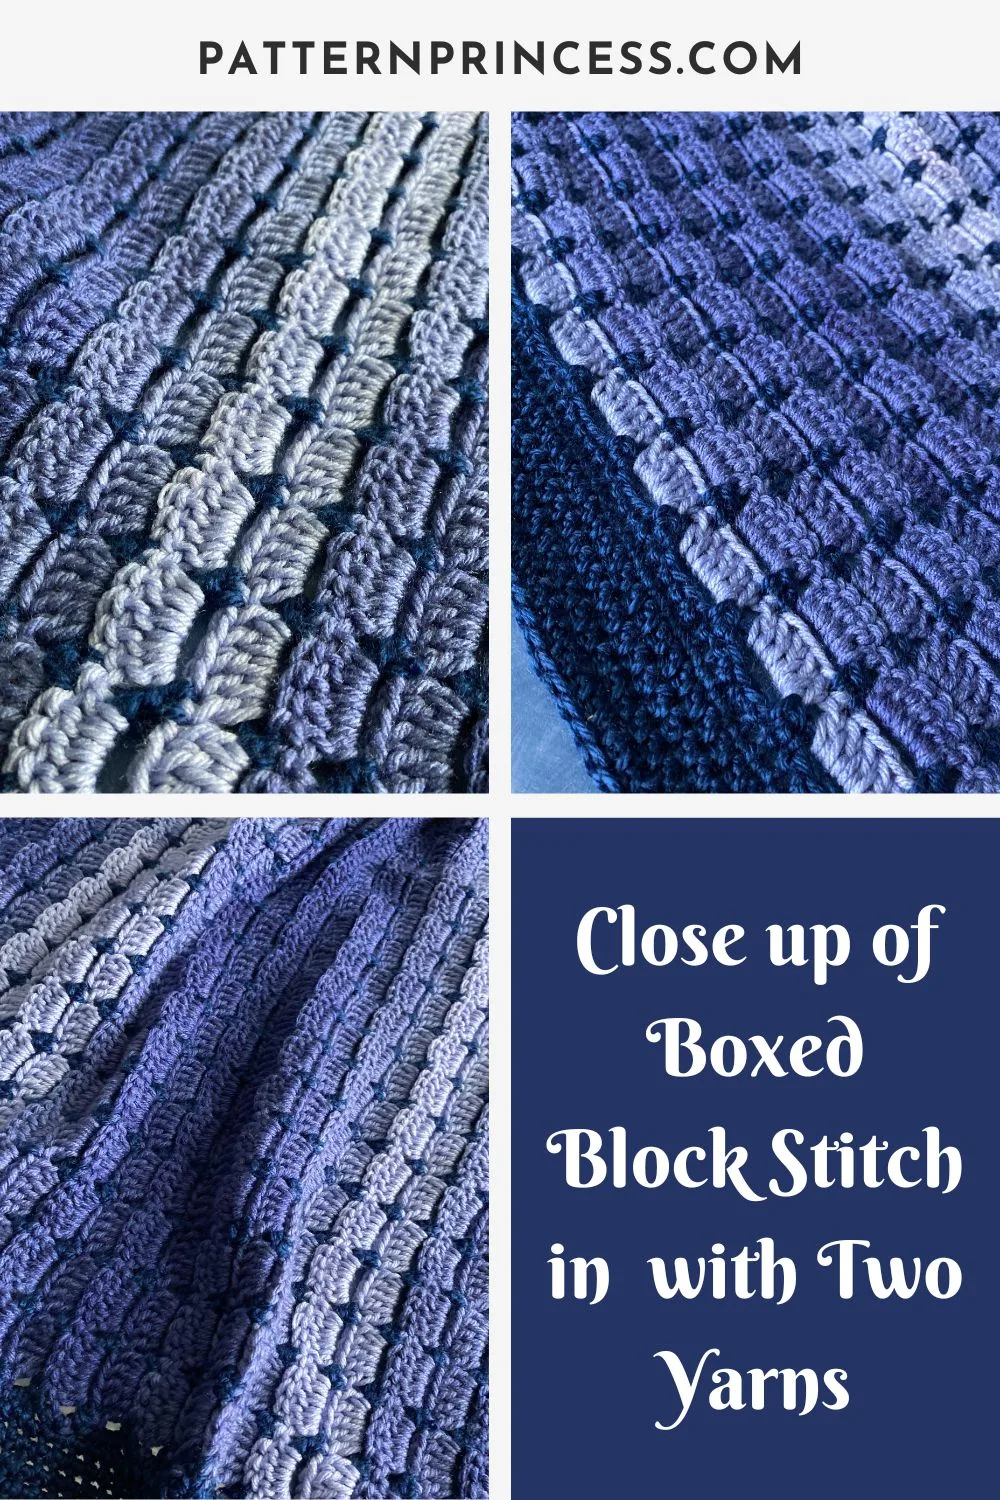 Close up of Boxed Block Stitch in with Two Yarns